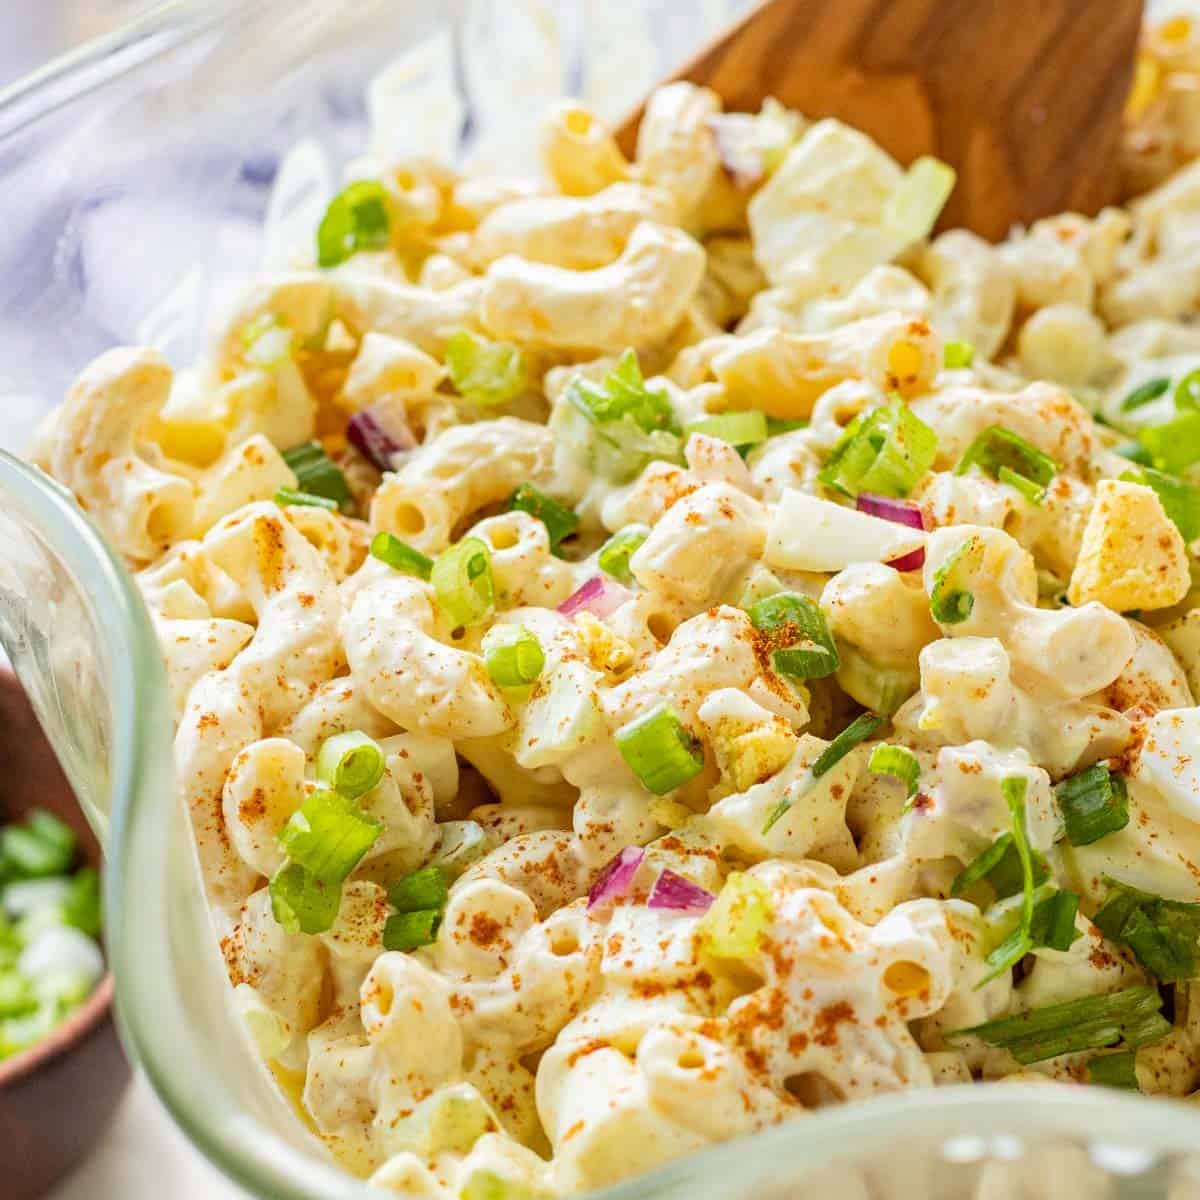 Deviled egg pasta salad in clear glass bowl with wavy edges, paprika and green onions on top.